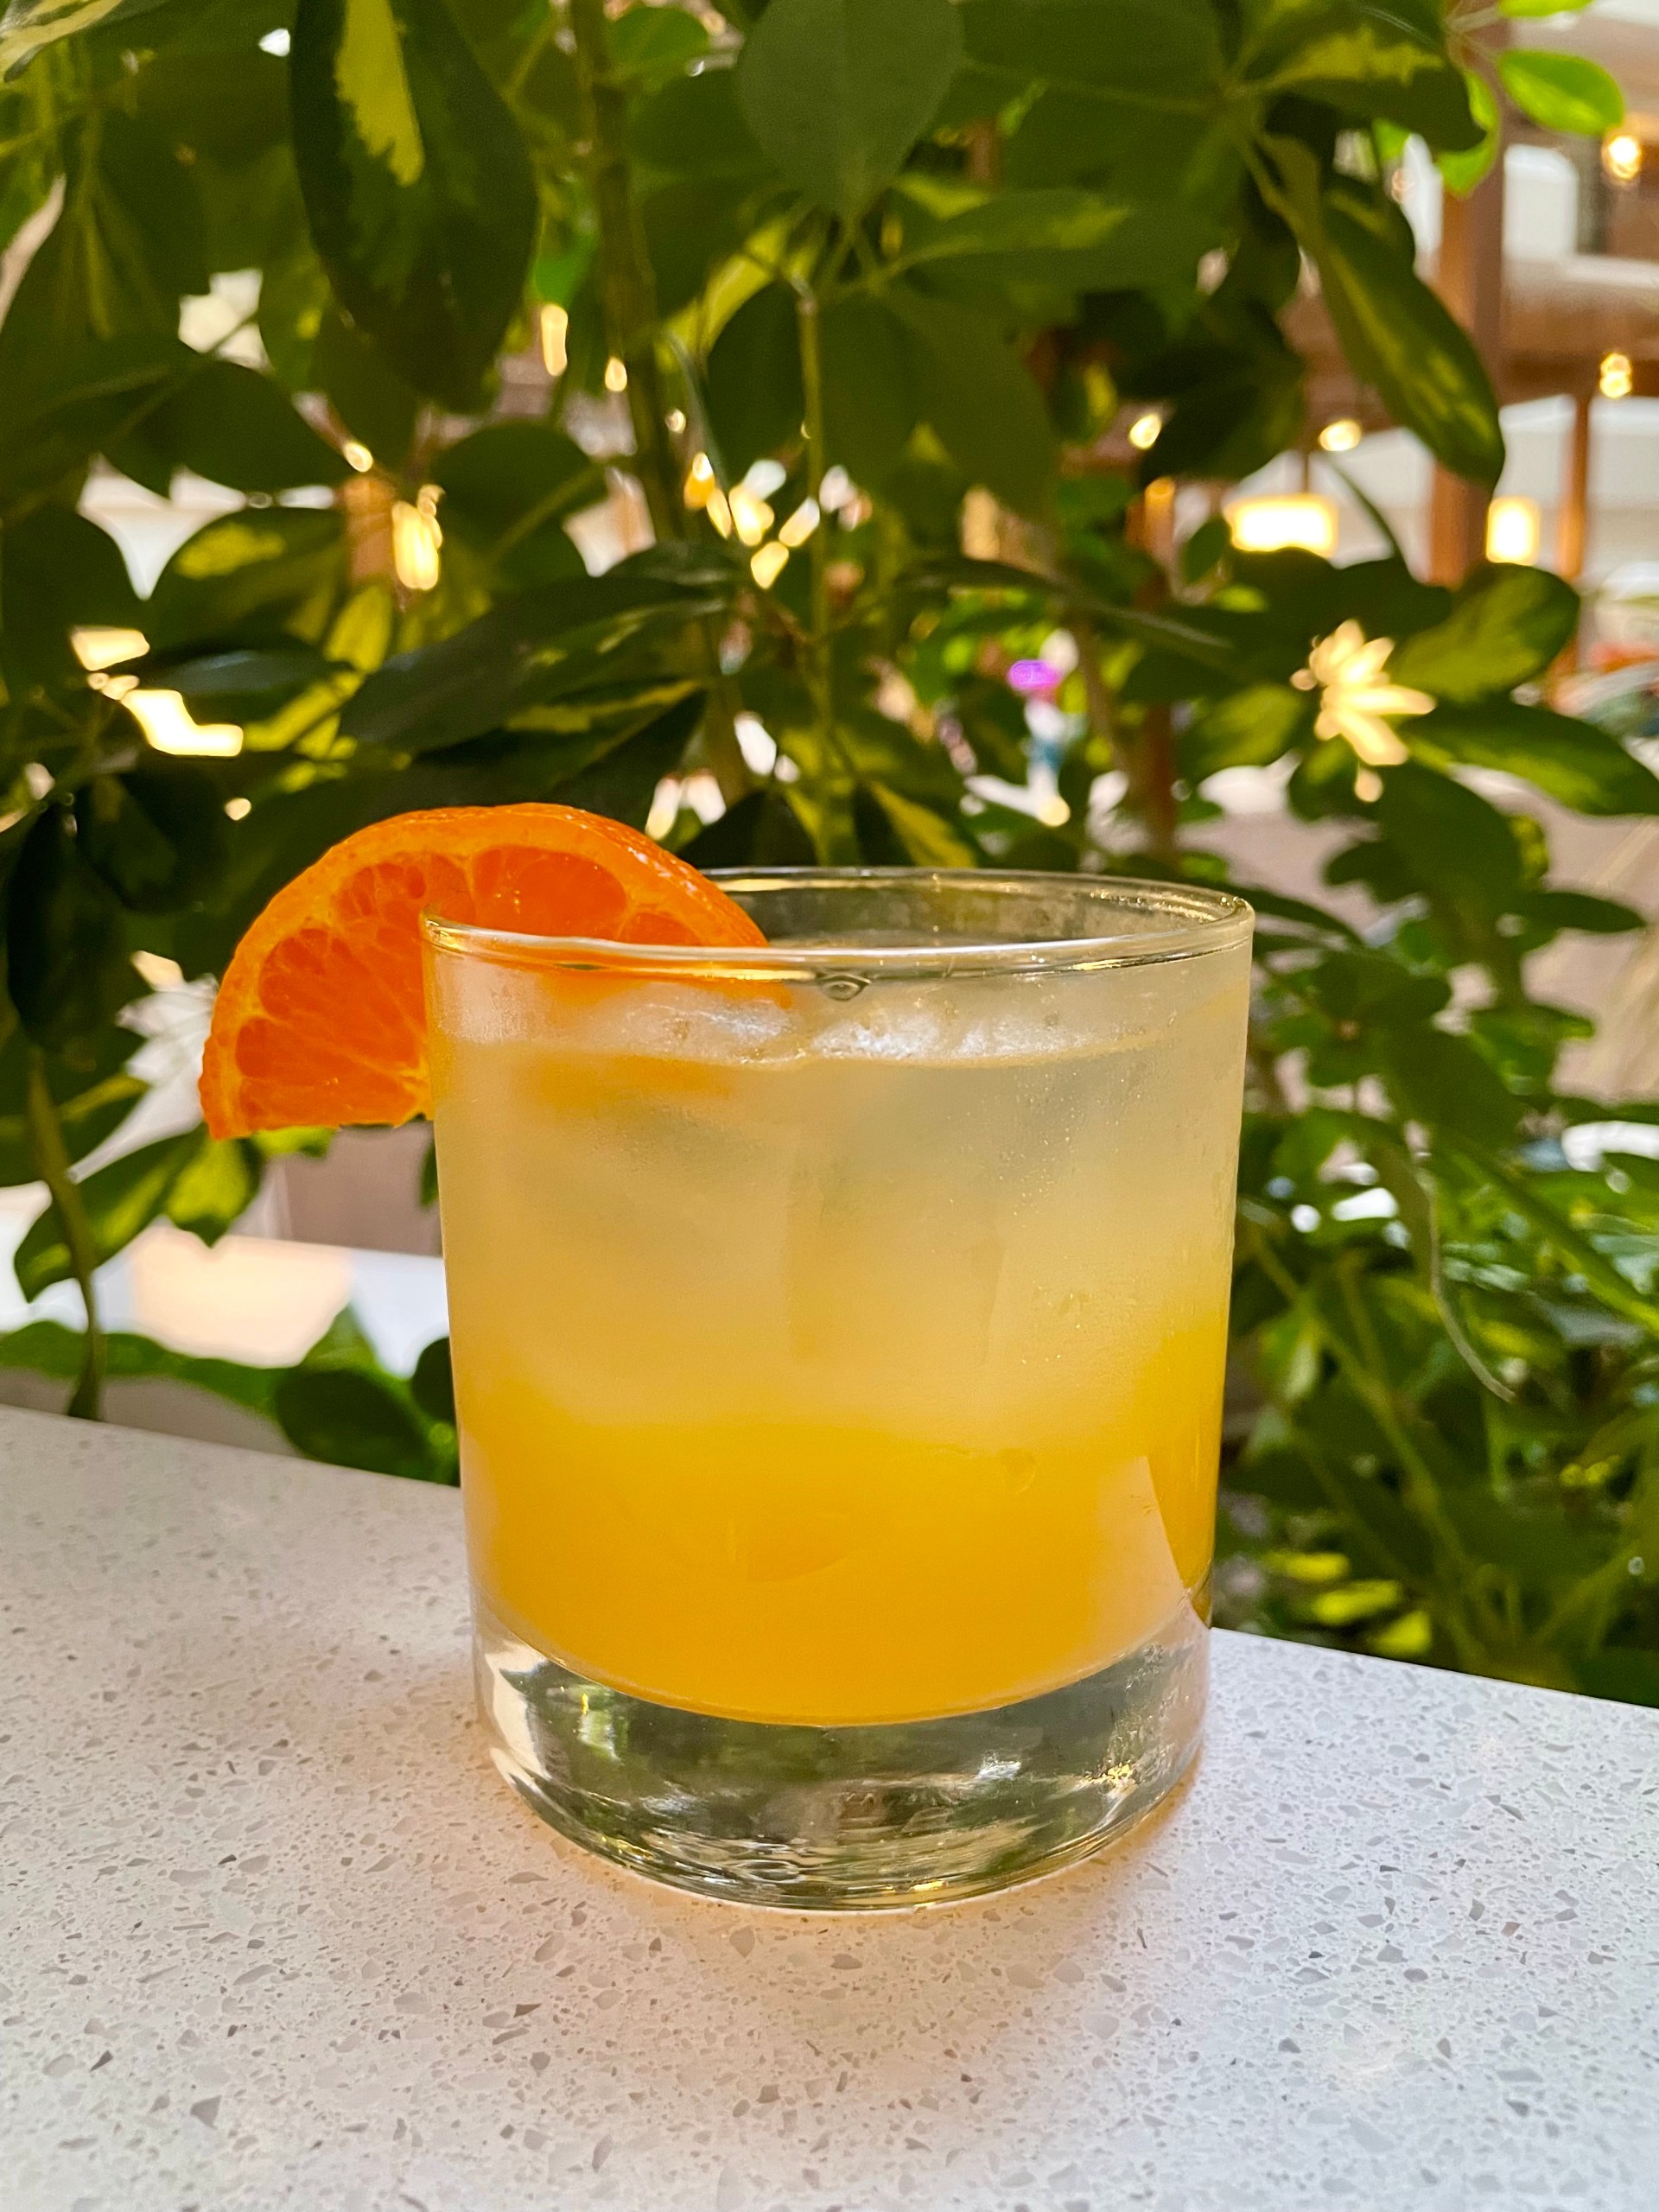 Embassy Suites by Hilton - 40th Anniversary Beverage - Noquila Fizz